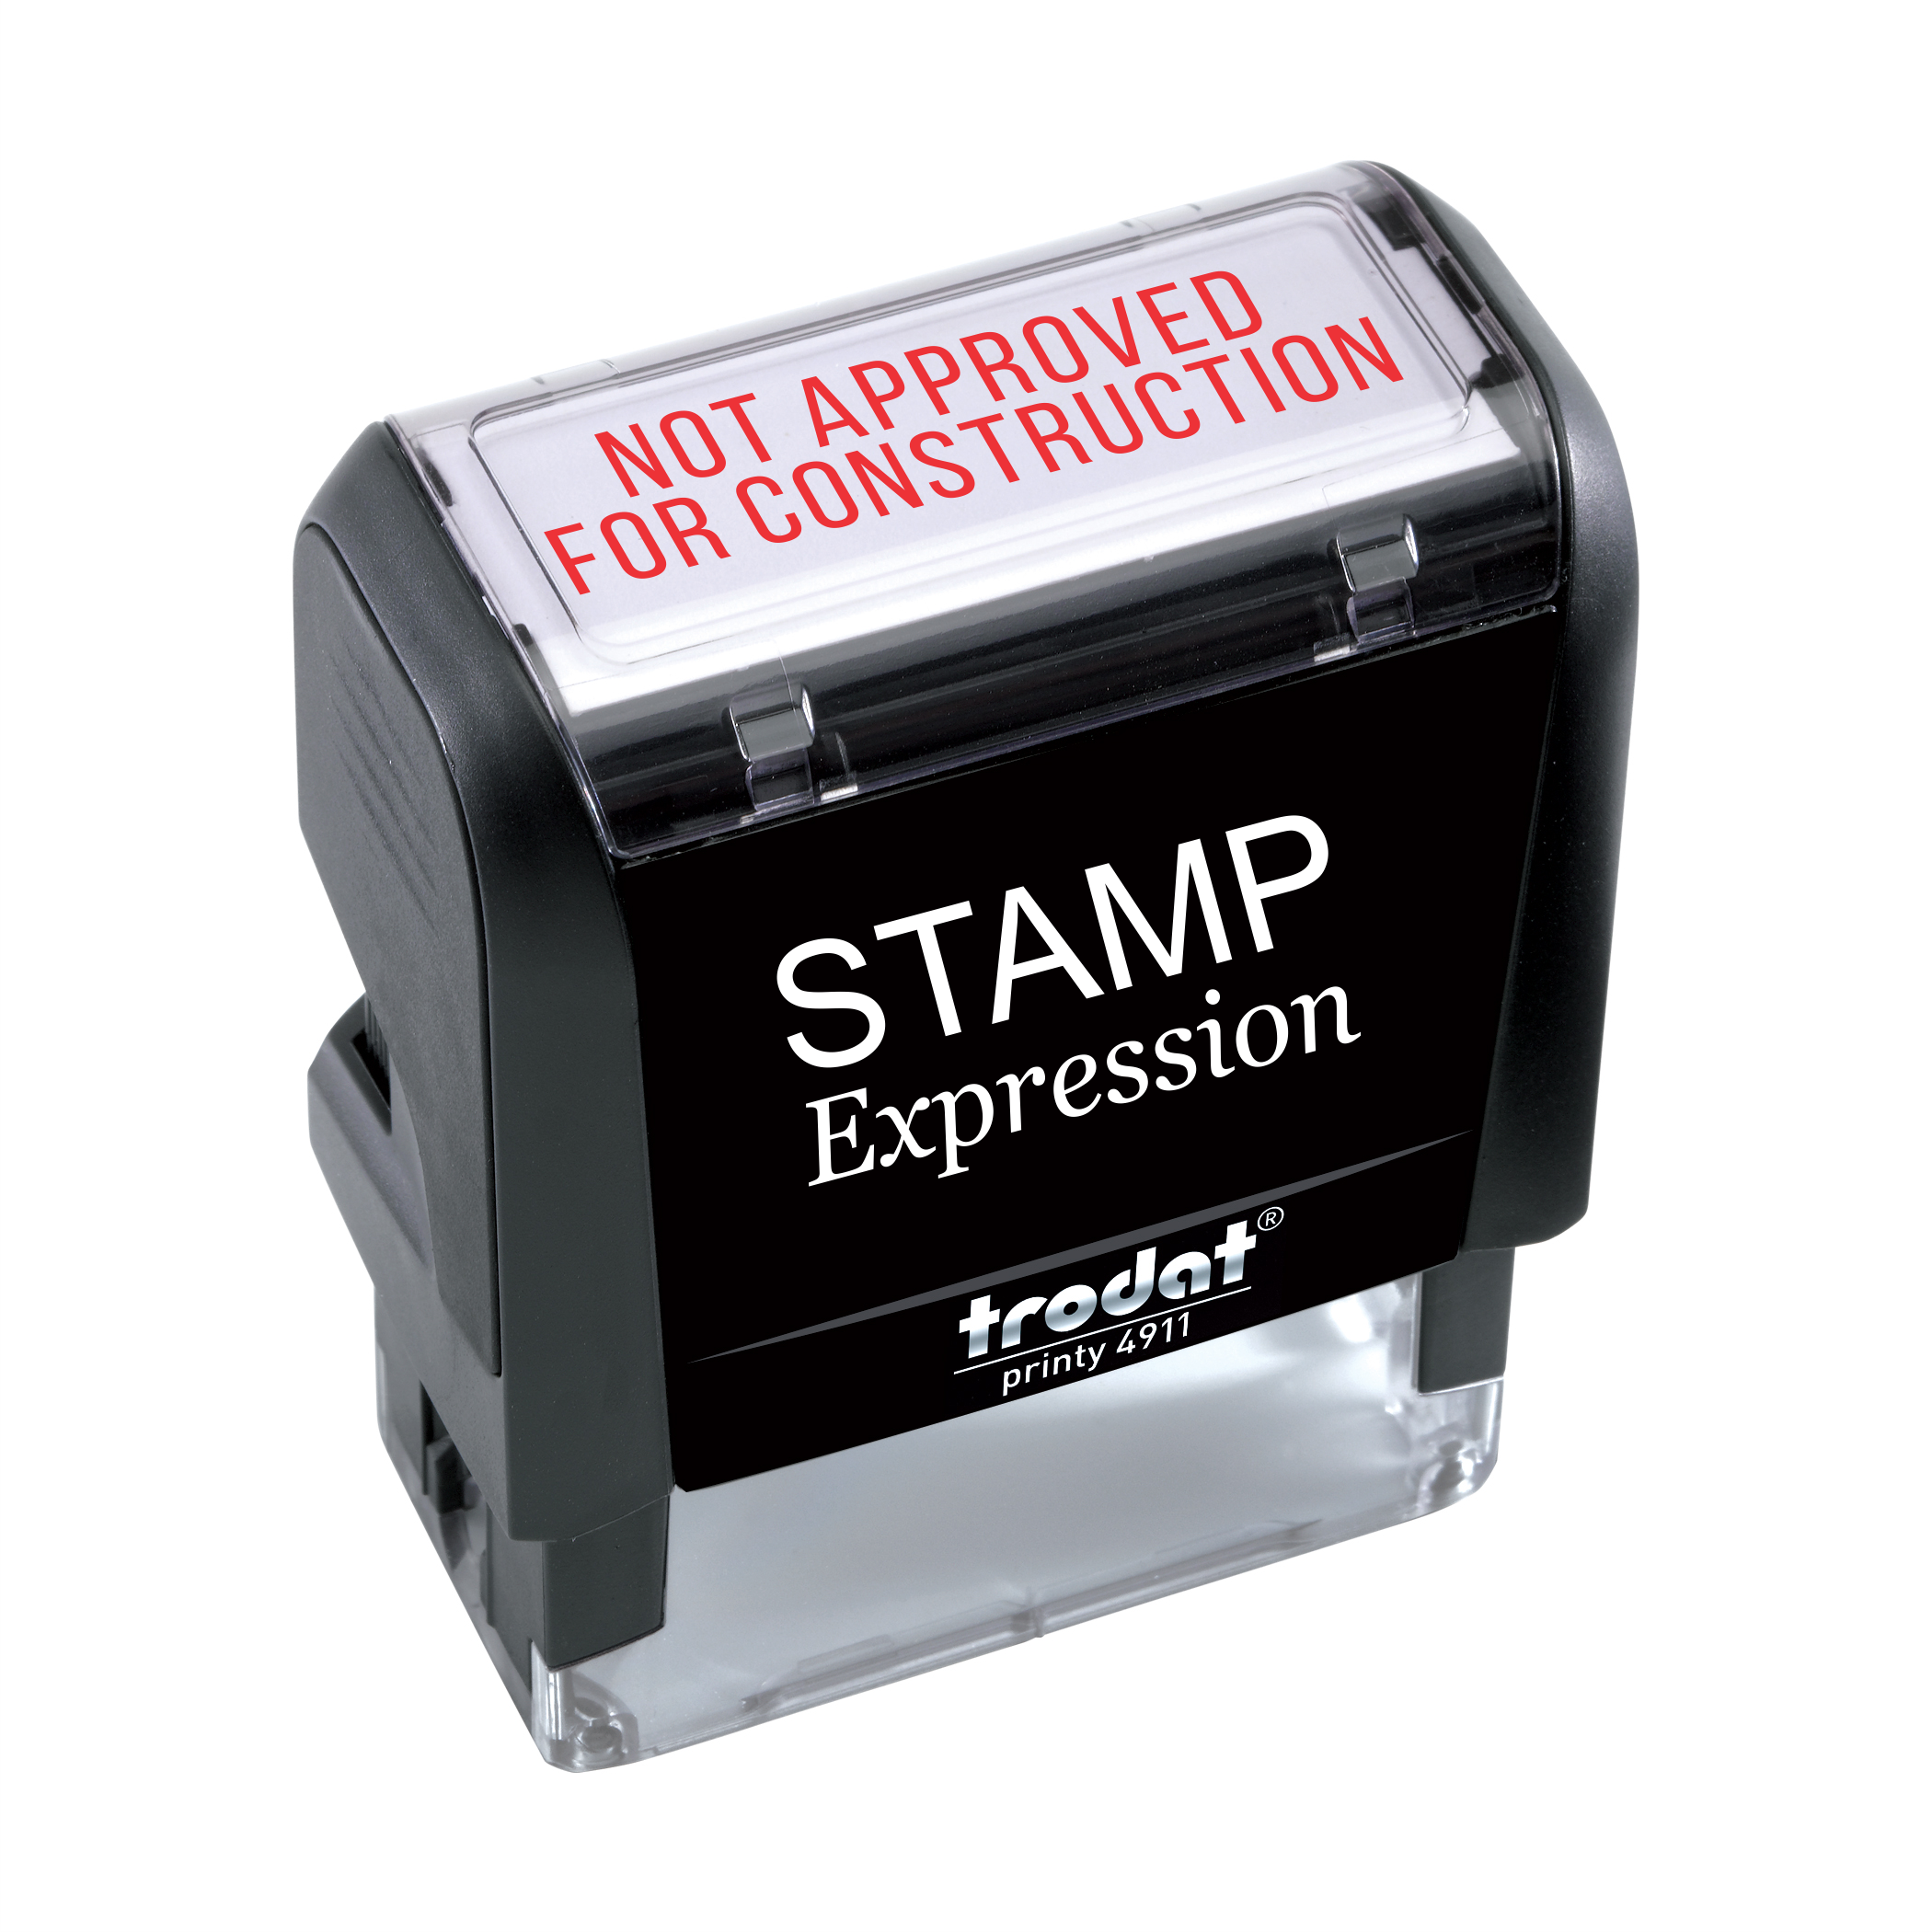 Not Approved For Construction Office Self Inking Rubber Stamp